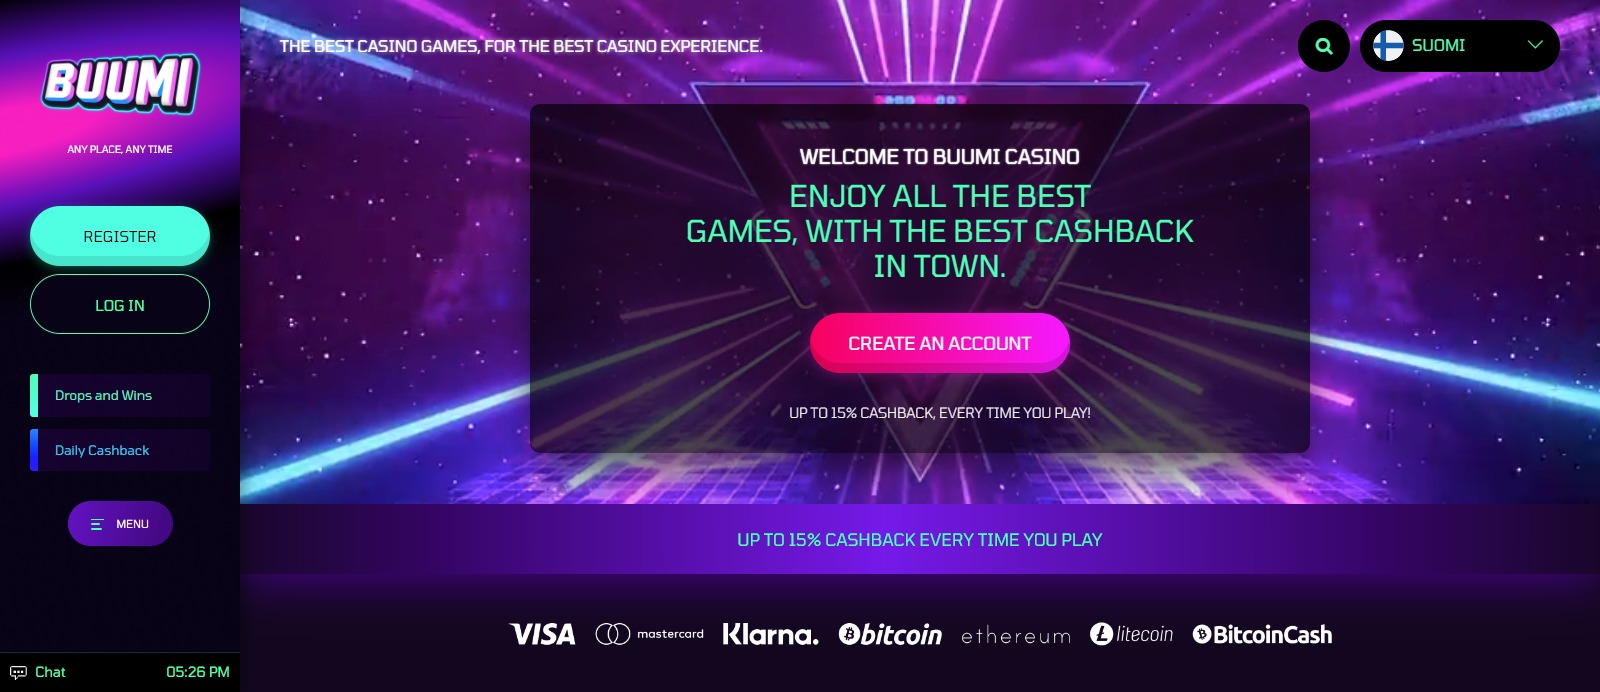 Buumi Casino Review: Up To 15% Cashback, Every Time You Play!